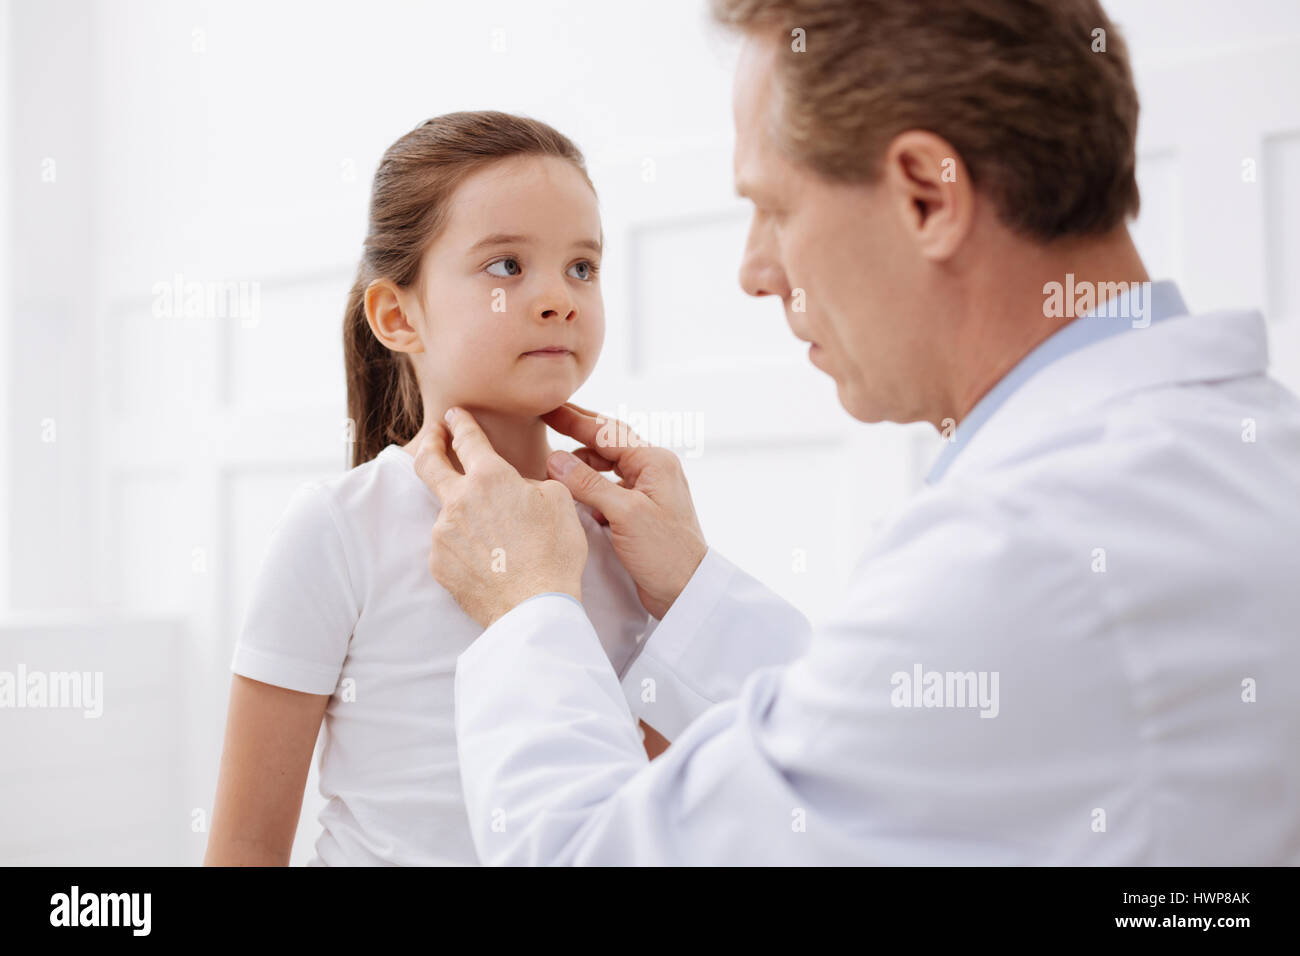 Does it hurt. Determined gentle prominent doctor examining little girls glands while comparing her symptoms to diagnosis Stock Photo